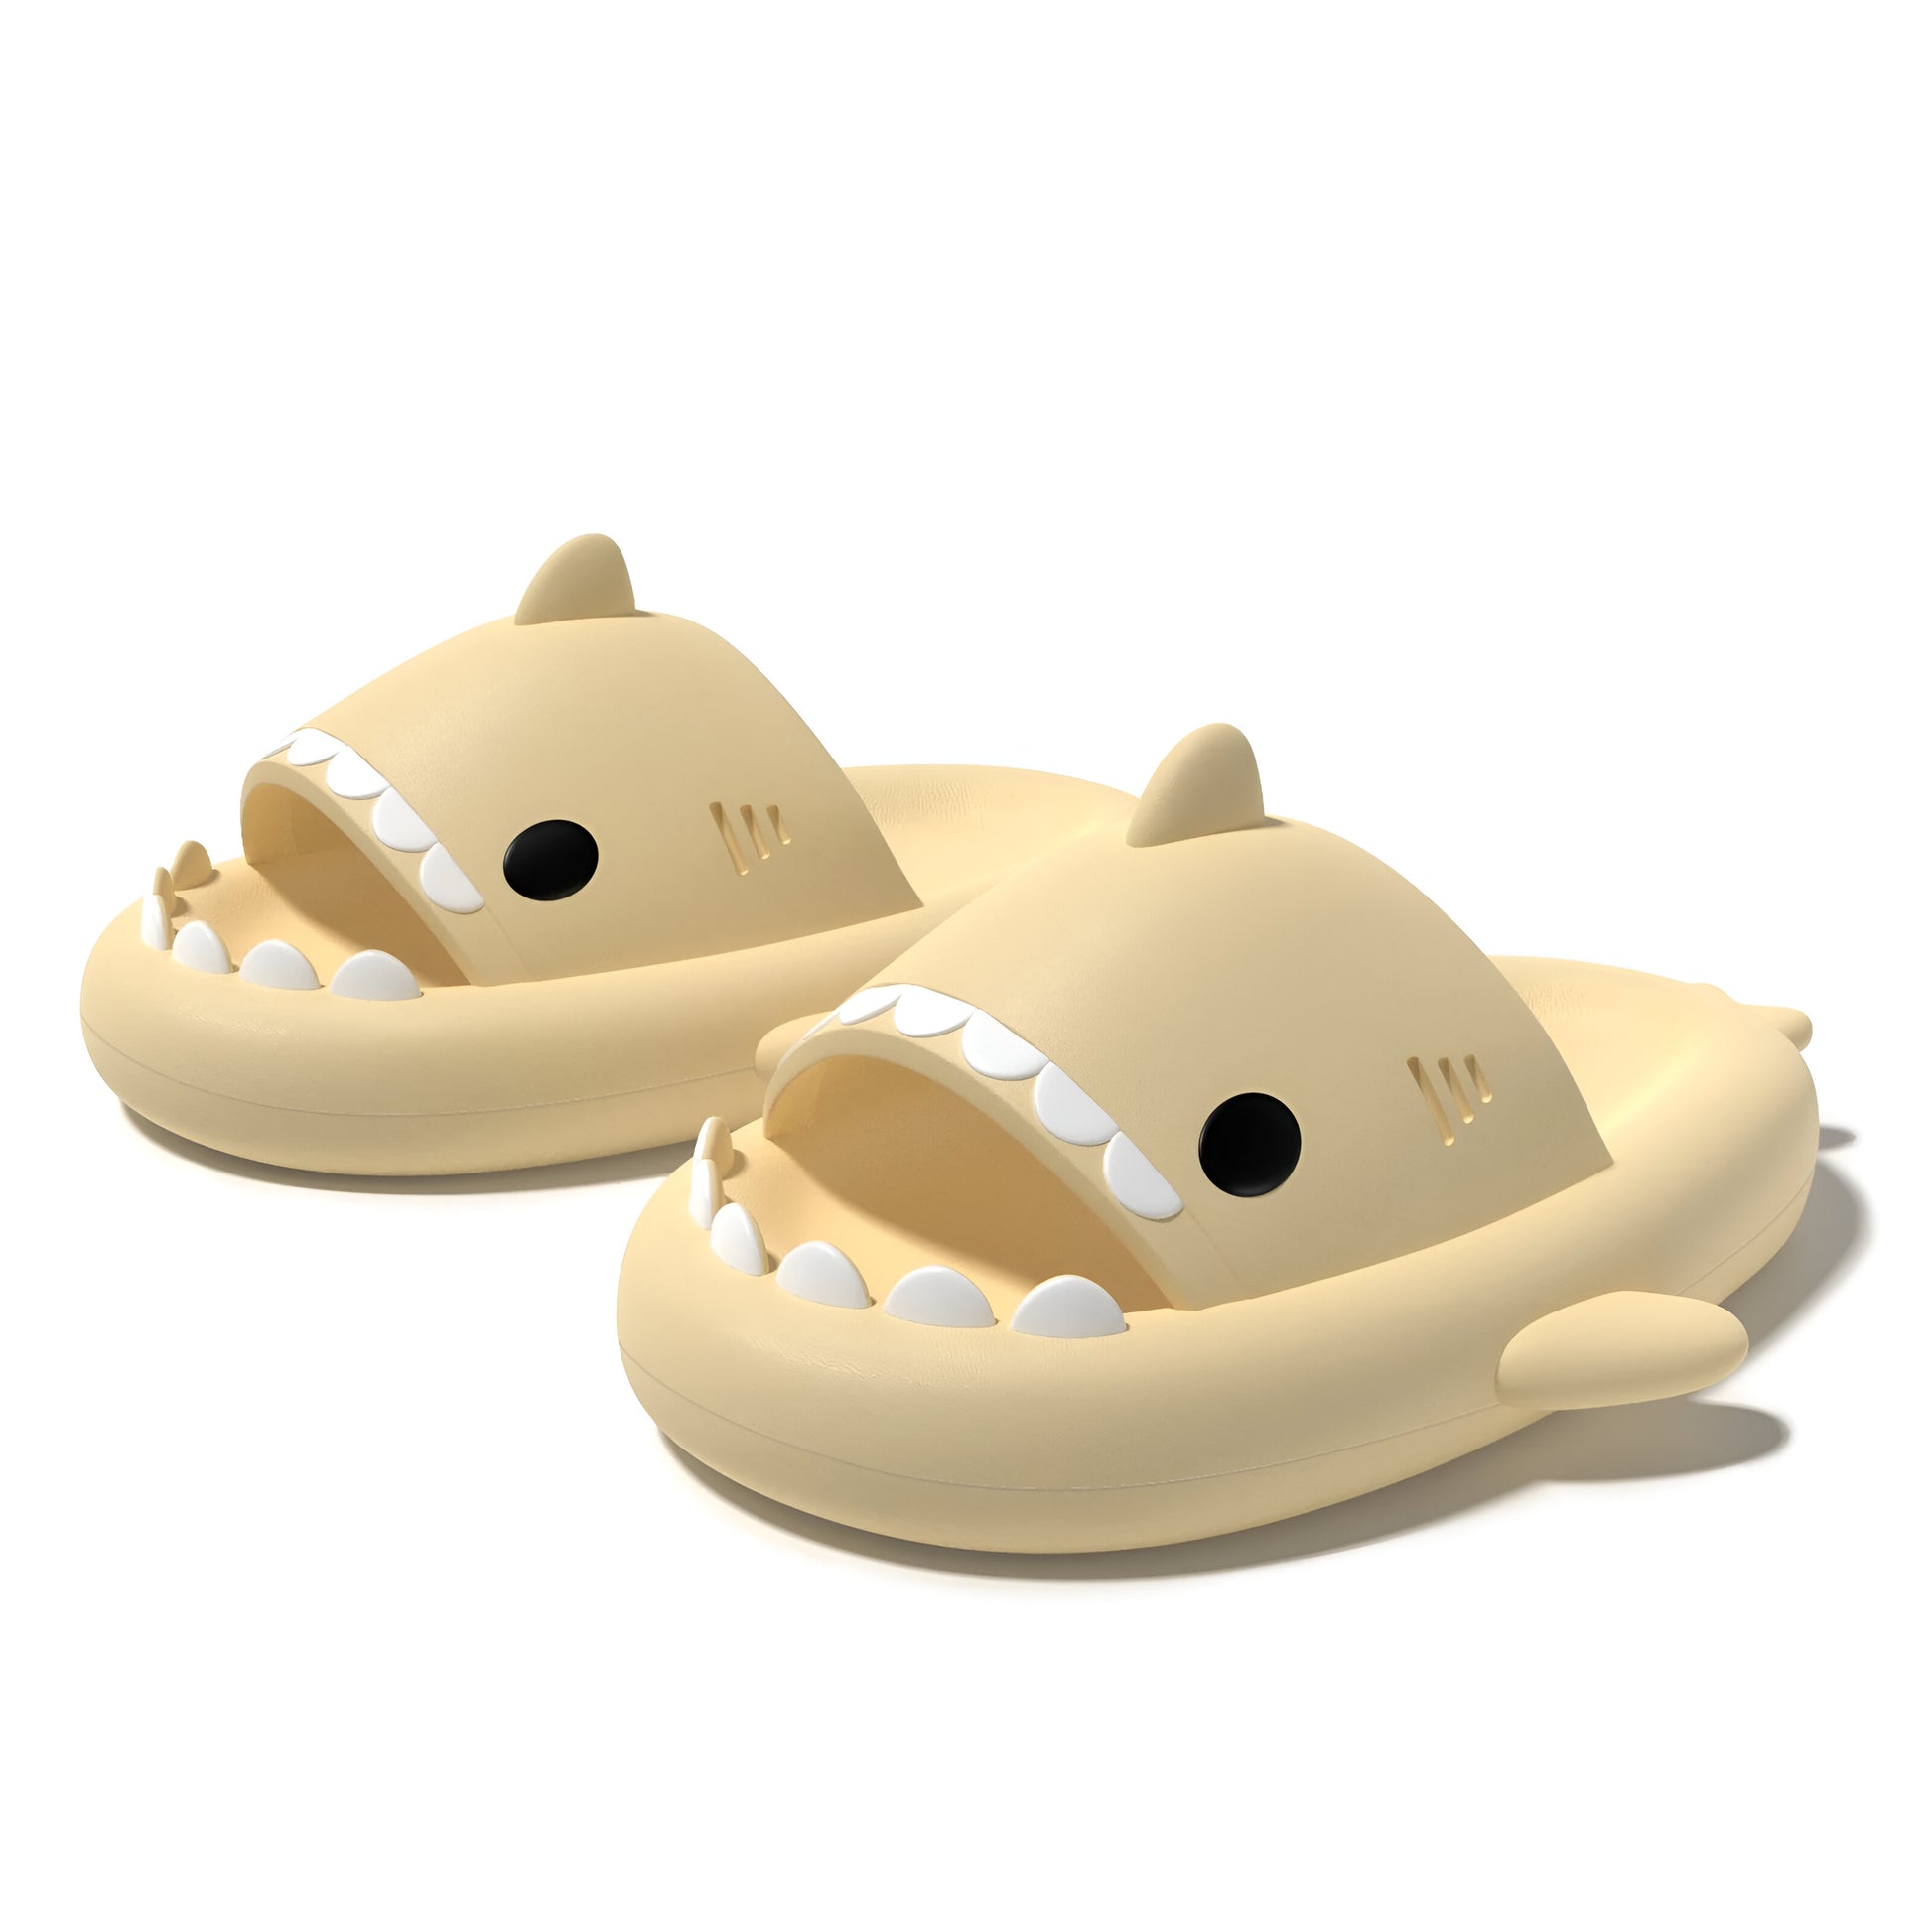 Summer Shark Slippers: Cool Comfort for Couples & Families!